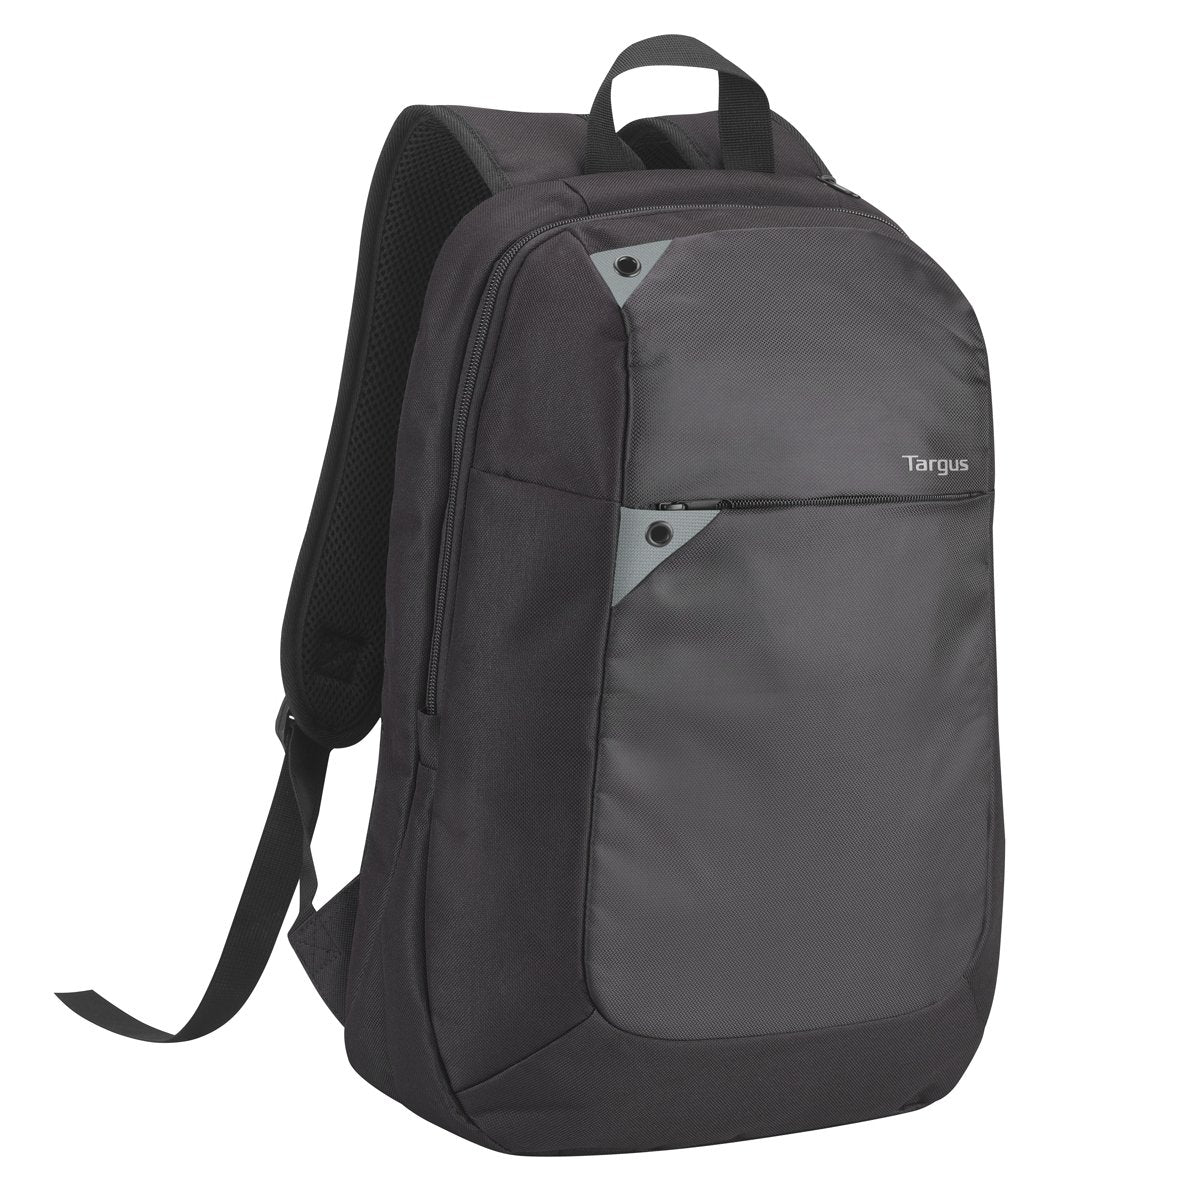 Targus Intellect 15.6in Laptop Backpack